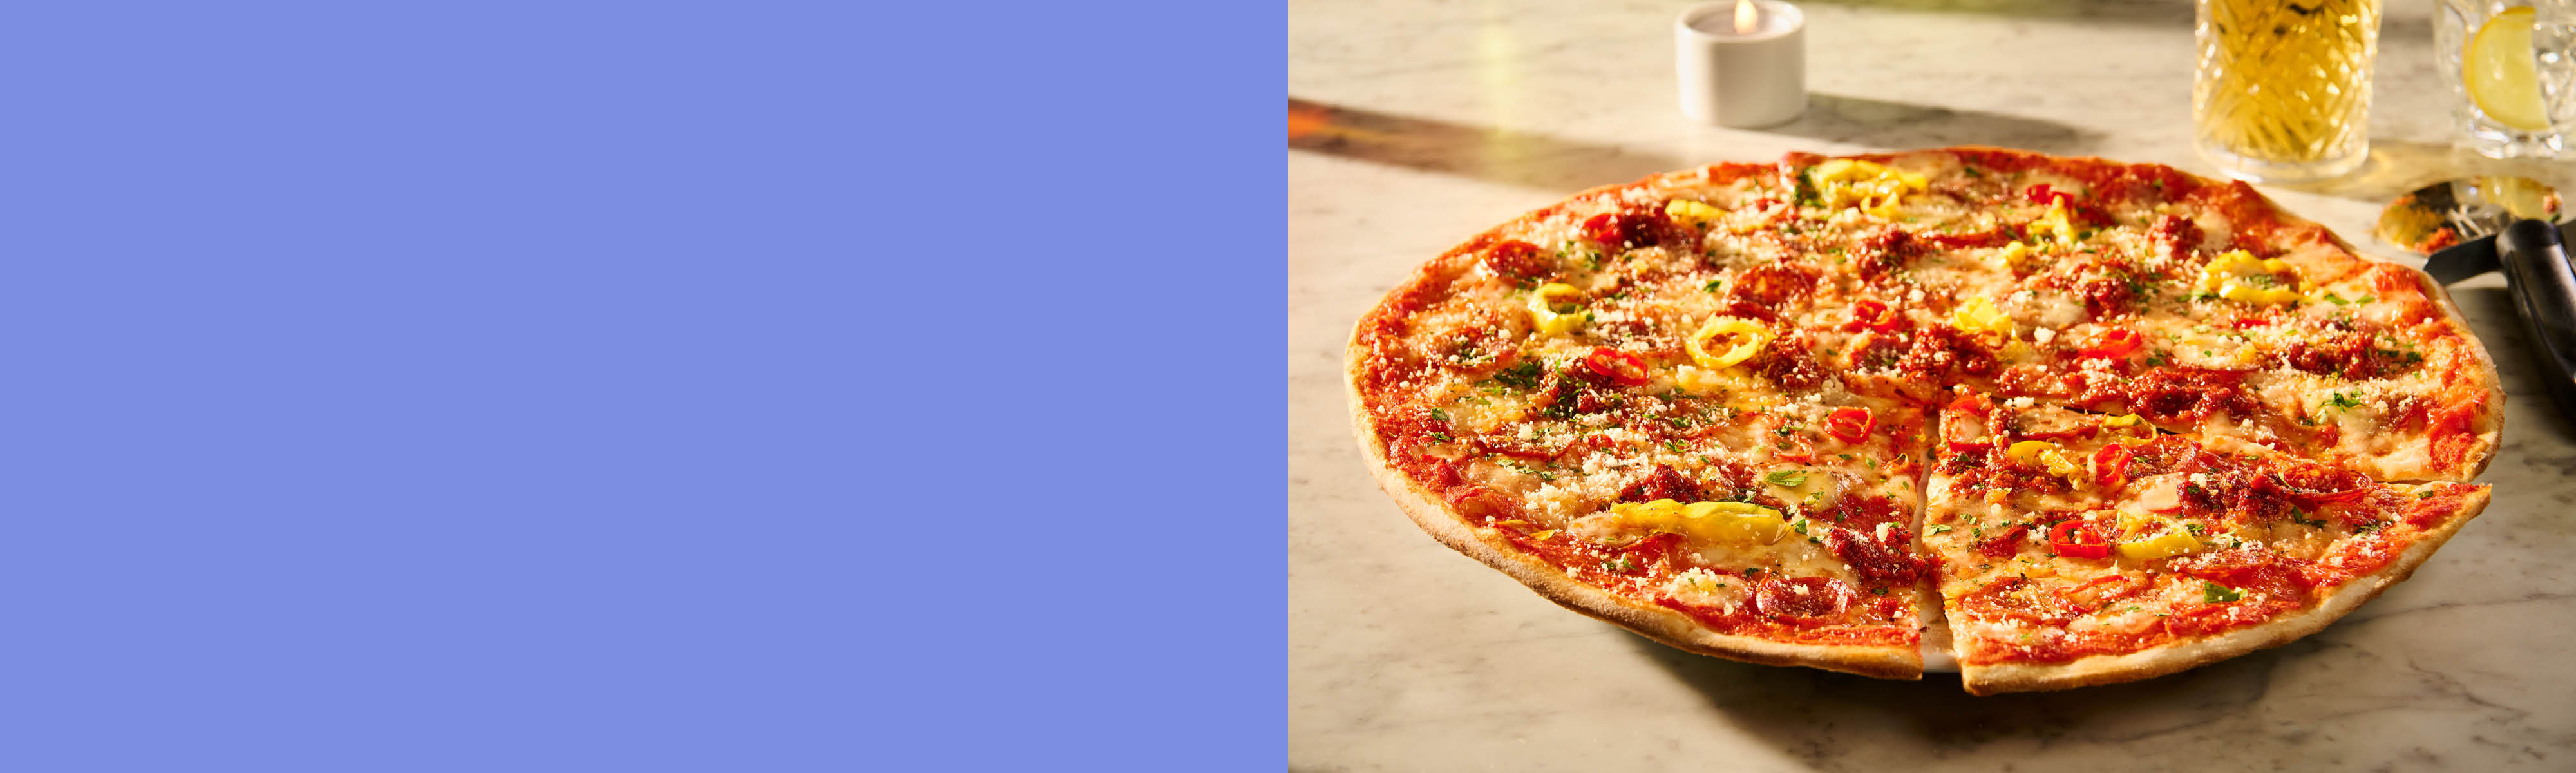 Pizza Express - Bestselling Pizzas